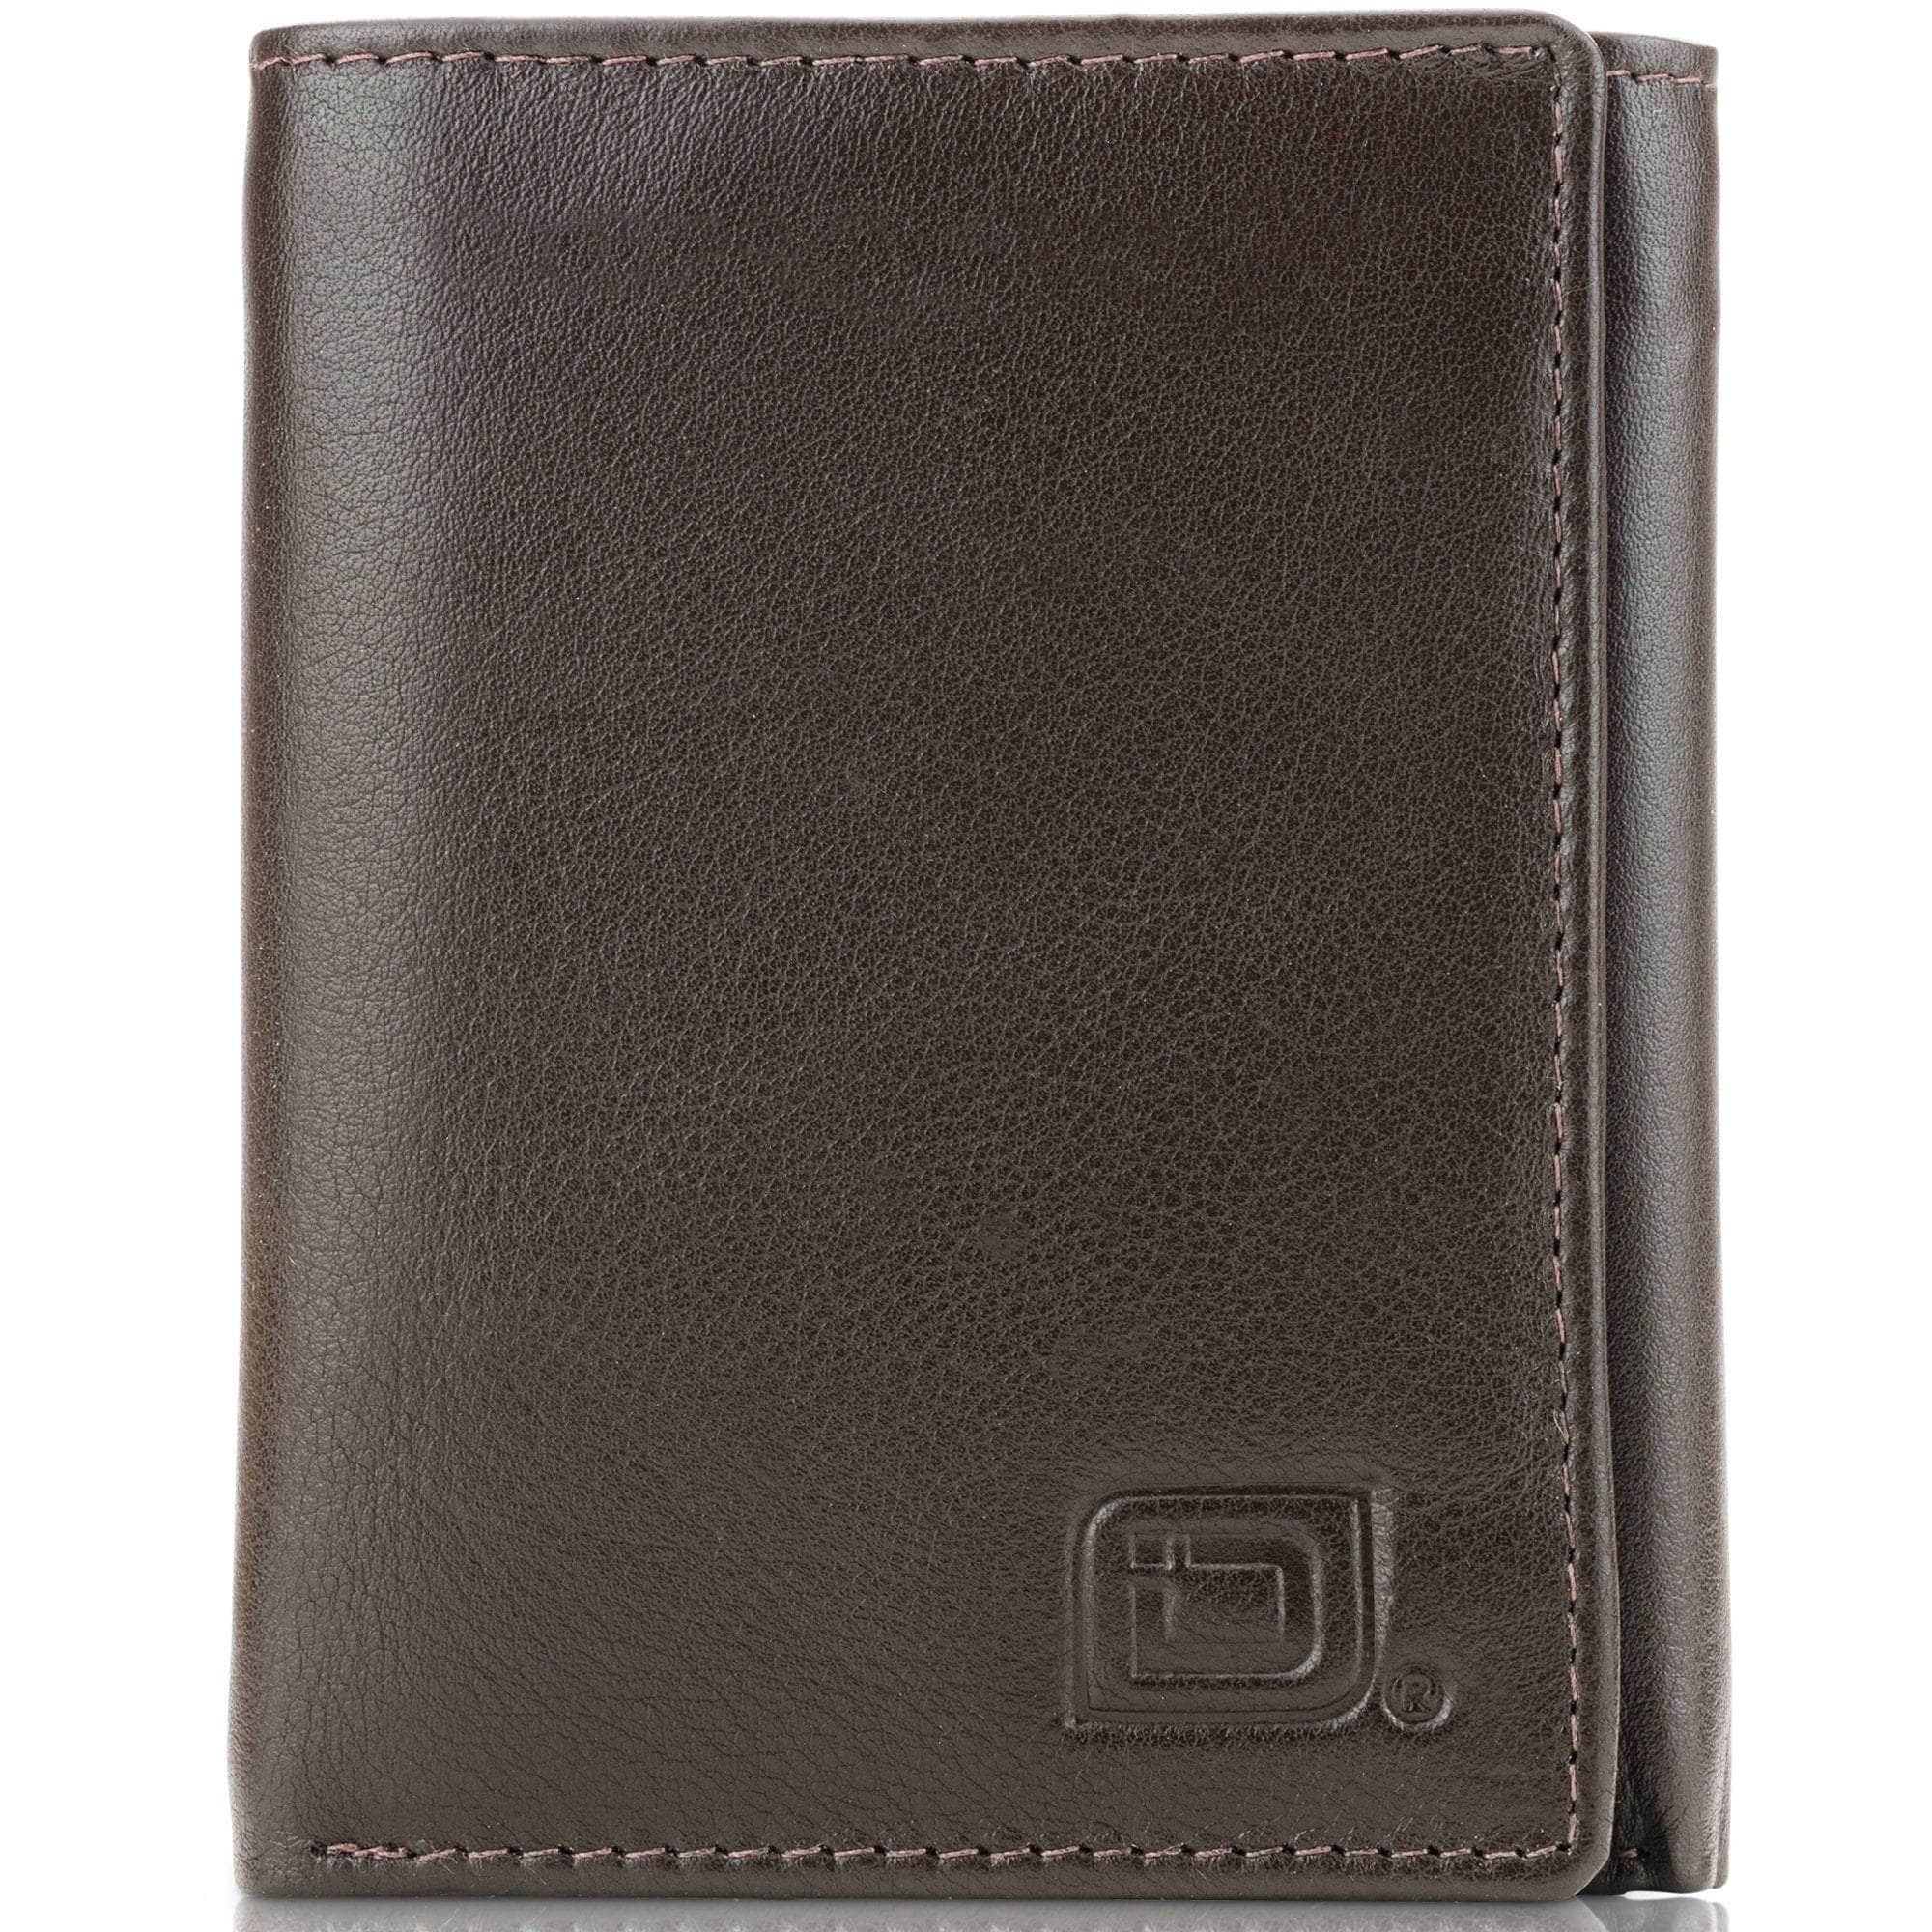 ID Stronghold Men's Wallet Brown Mens RFID Wallet - Extra Capacity Trifold 8 slot with ID Window